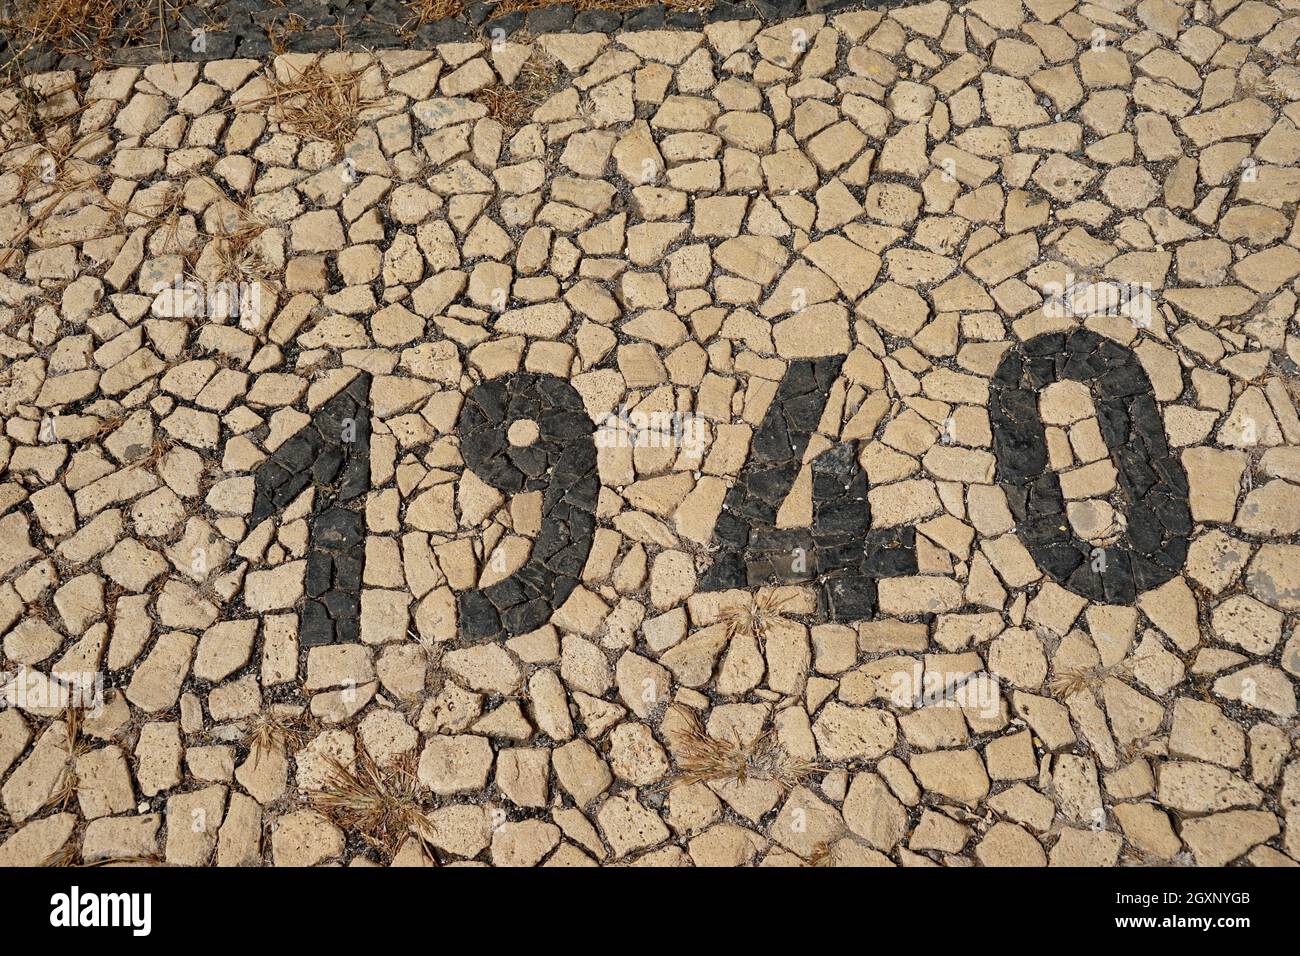 1940, Floor mosaic in front of infirmary, Tarrafal concentration camp, Santiago Island, Republic of Cape Verde Stock Photo